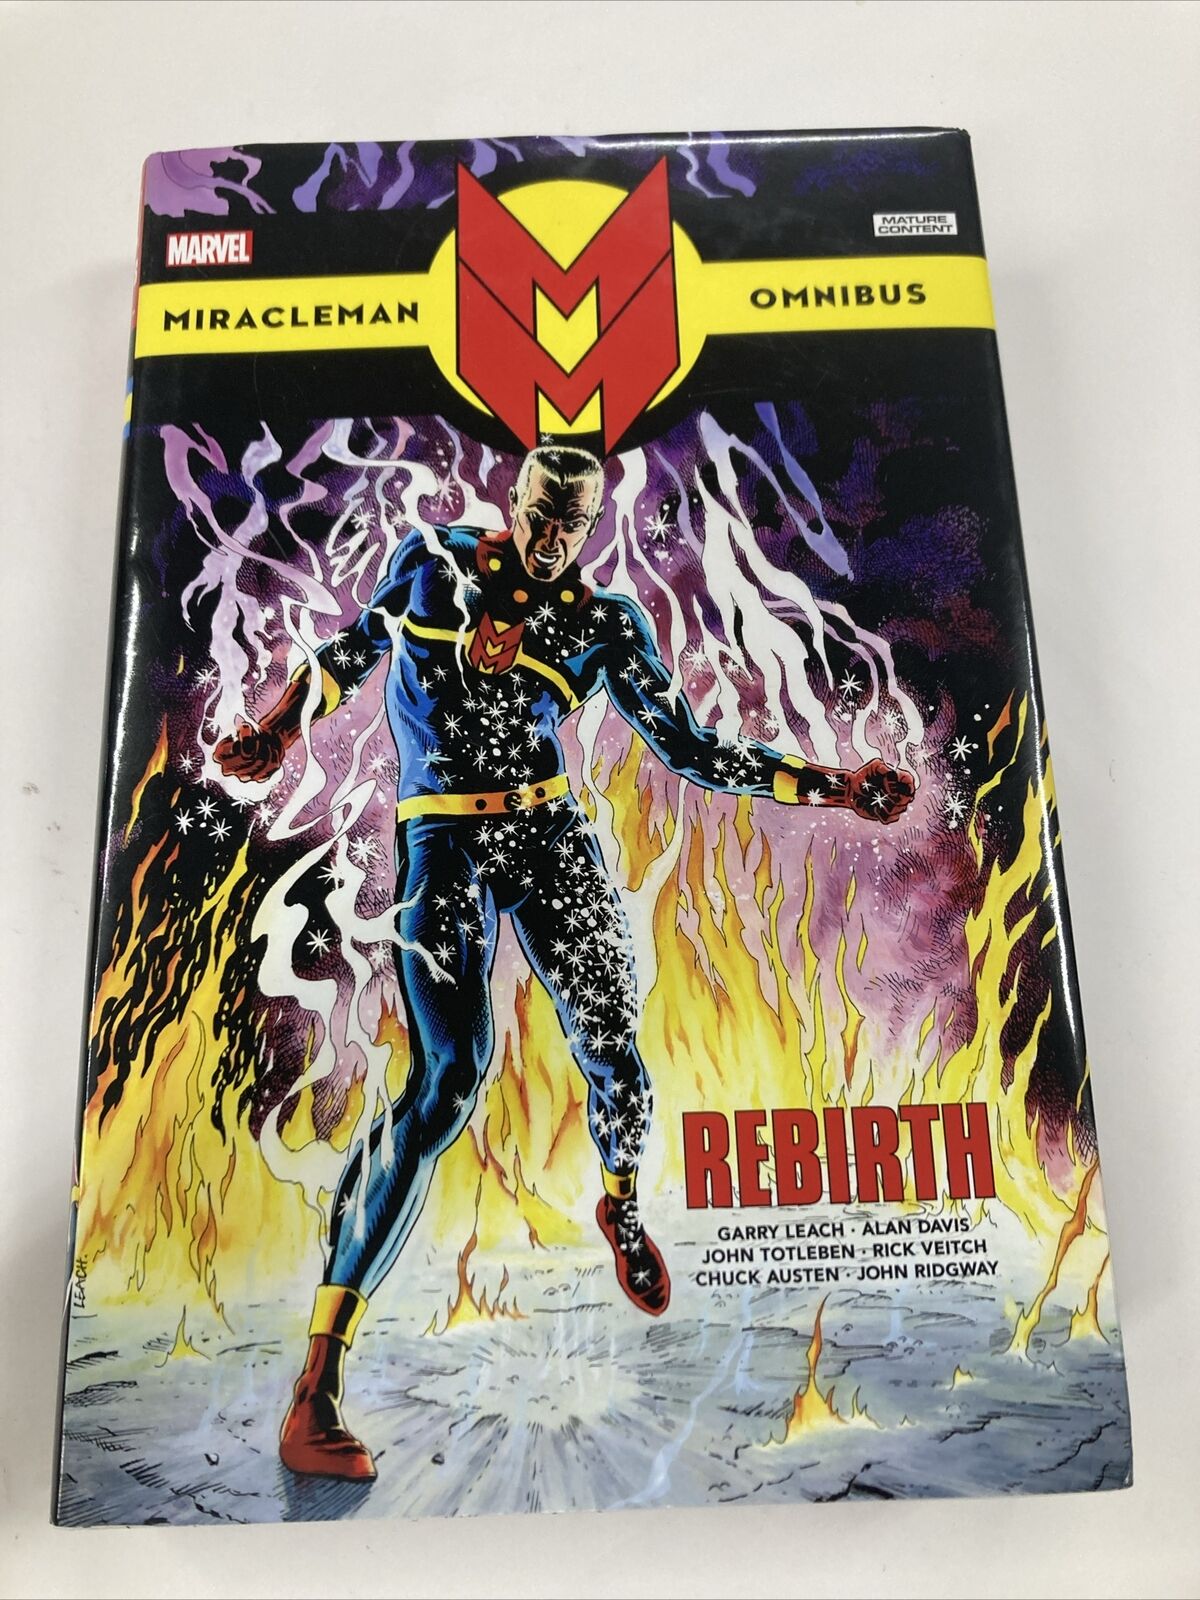 DAMAGED Miracleman Omnibus Leach DM Cover New Marvel Comics HC Hardcover